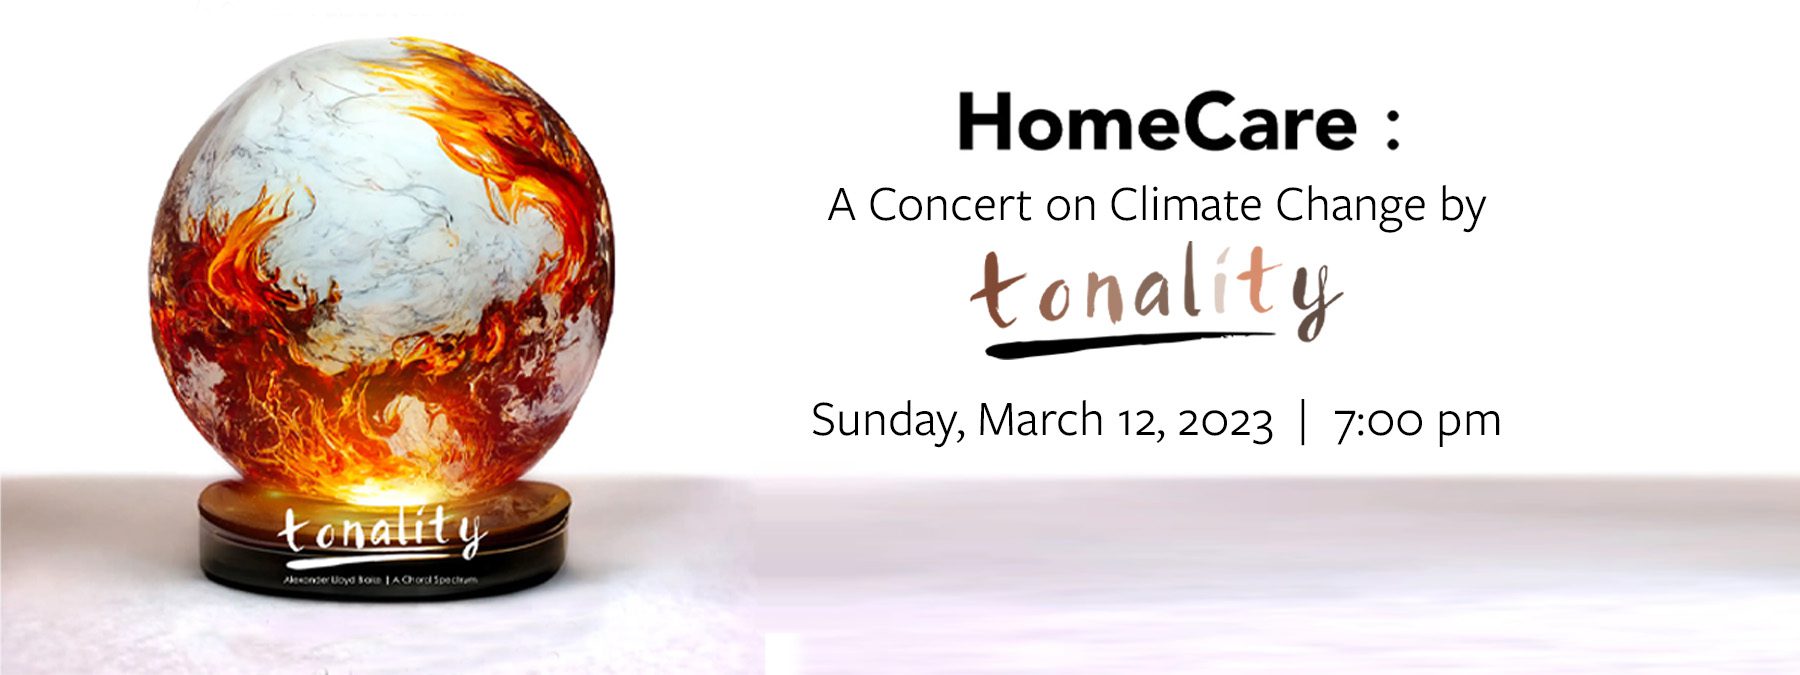 HomeCare: A Concert on Climate Change by Tonality